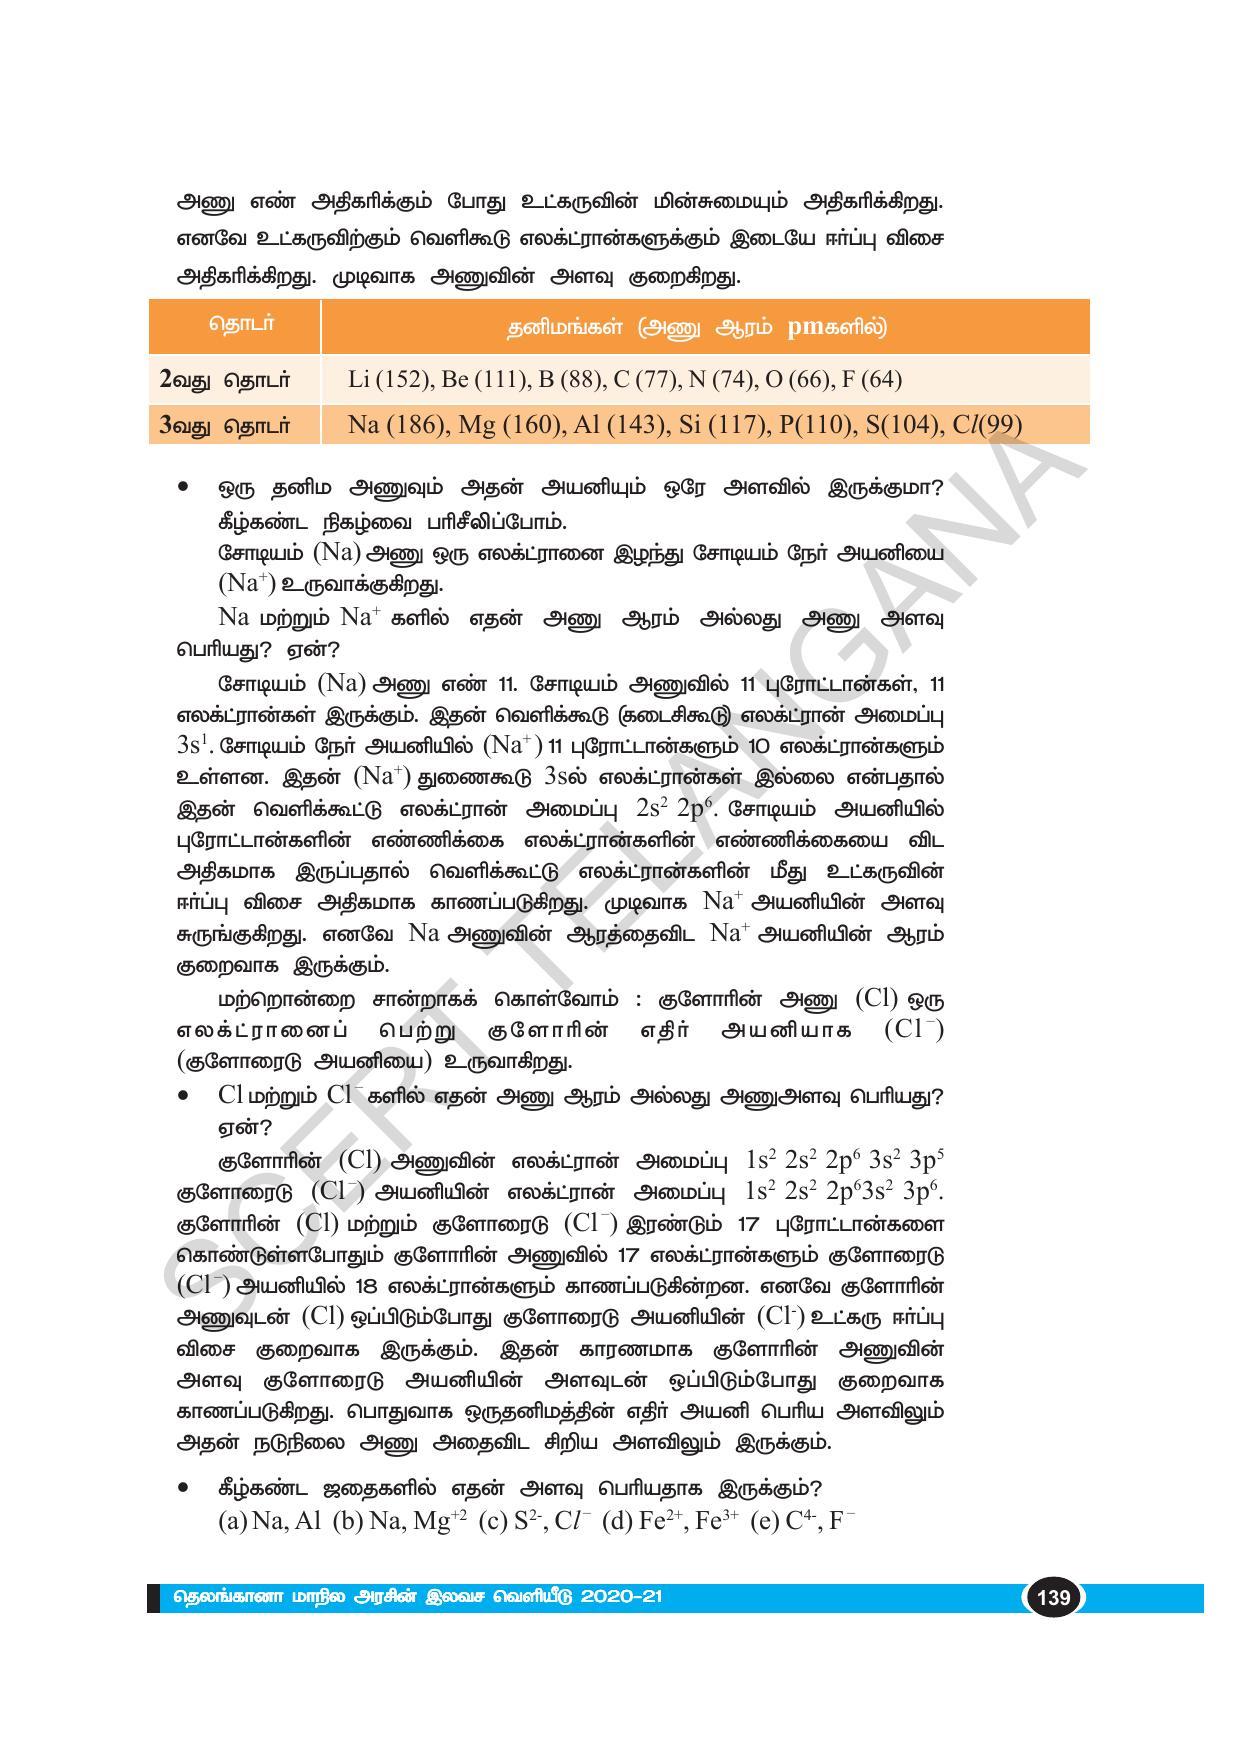 TS SCERT Class 10 Physical Science(Tamil Medium) Text Book - Page 151